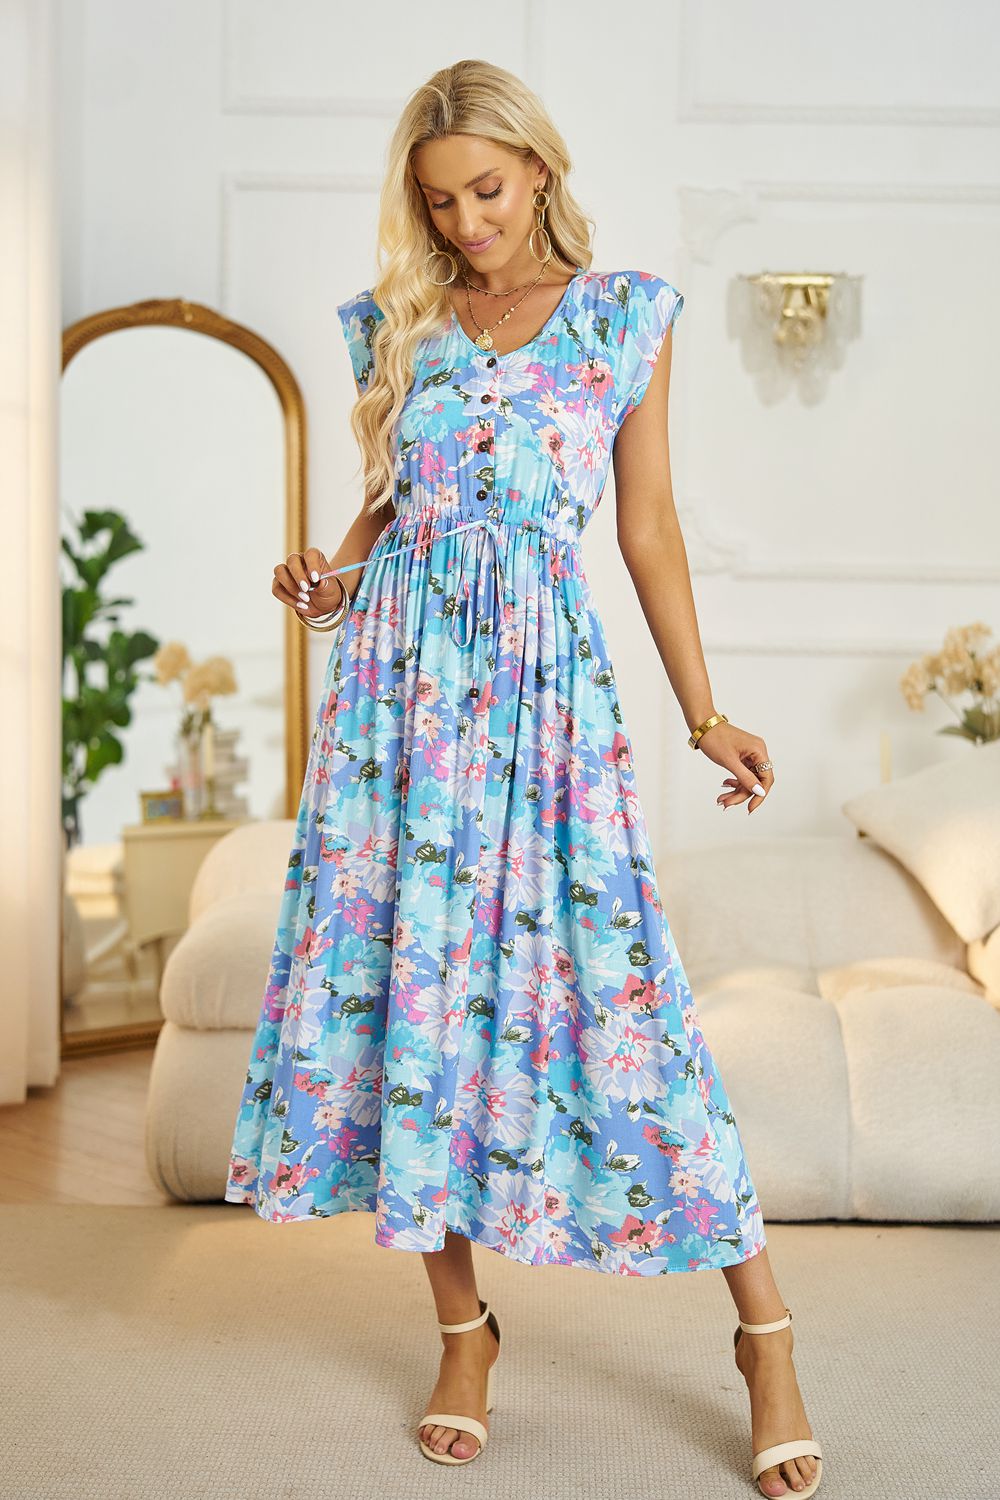 Free for Brunch Floral Midi Dress - Cheeky Chic Boutique